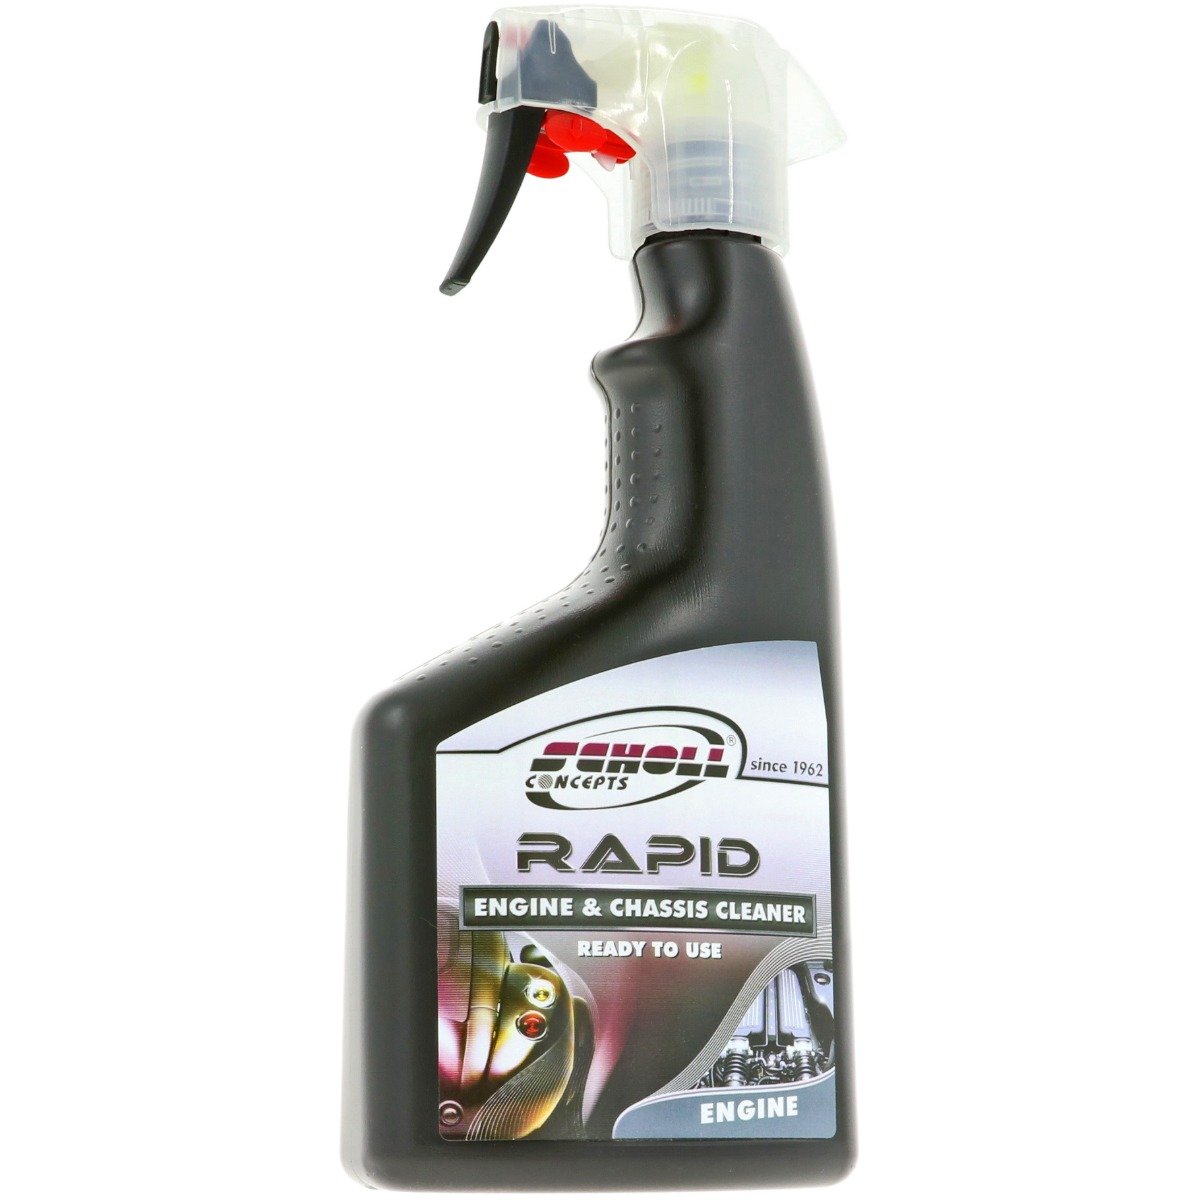 RAPID Engine & Chassis Cleaner - 500ml